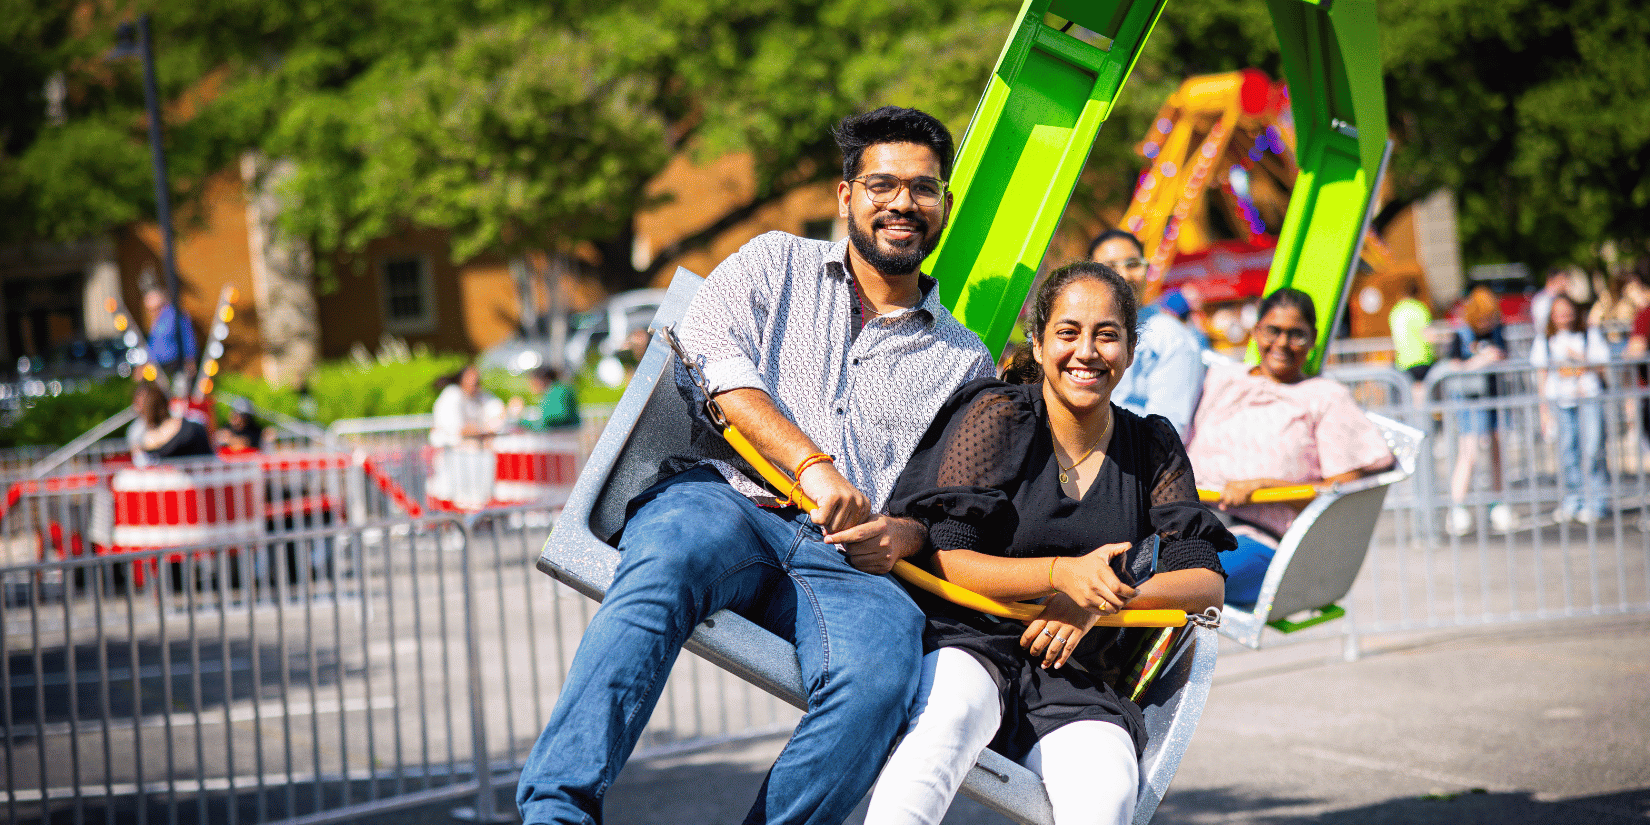 two people sitting on a swinging ride